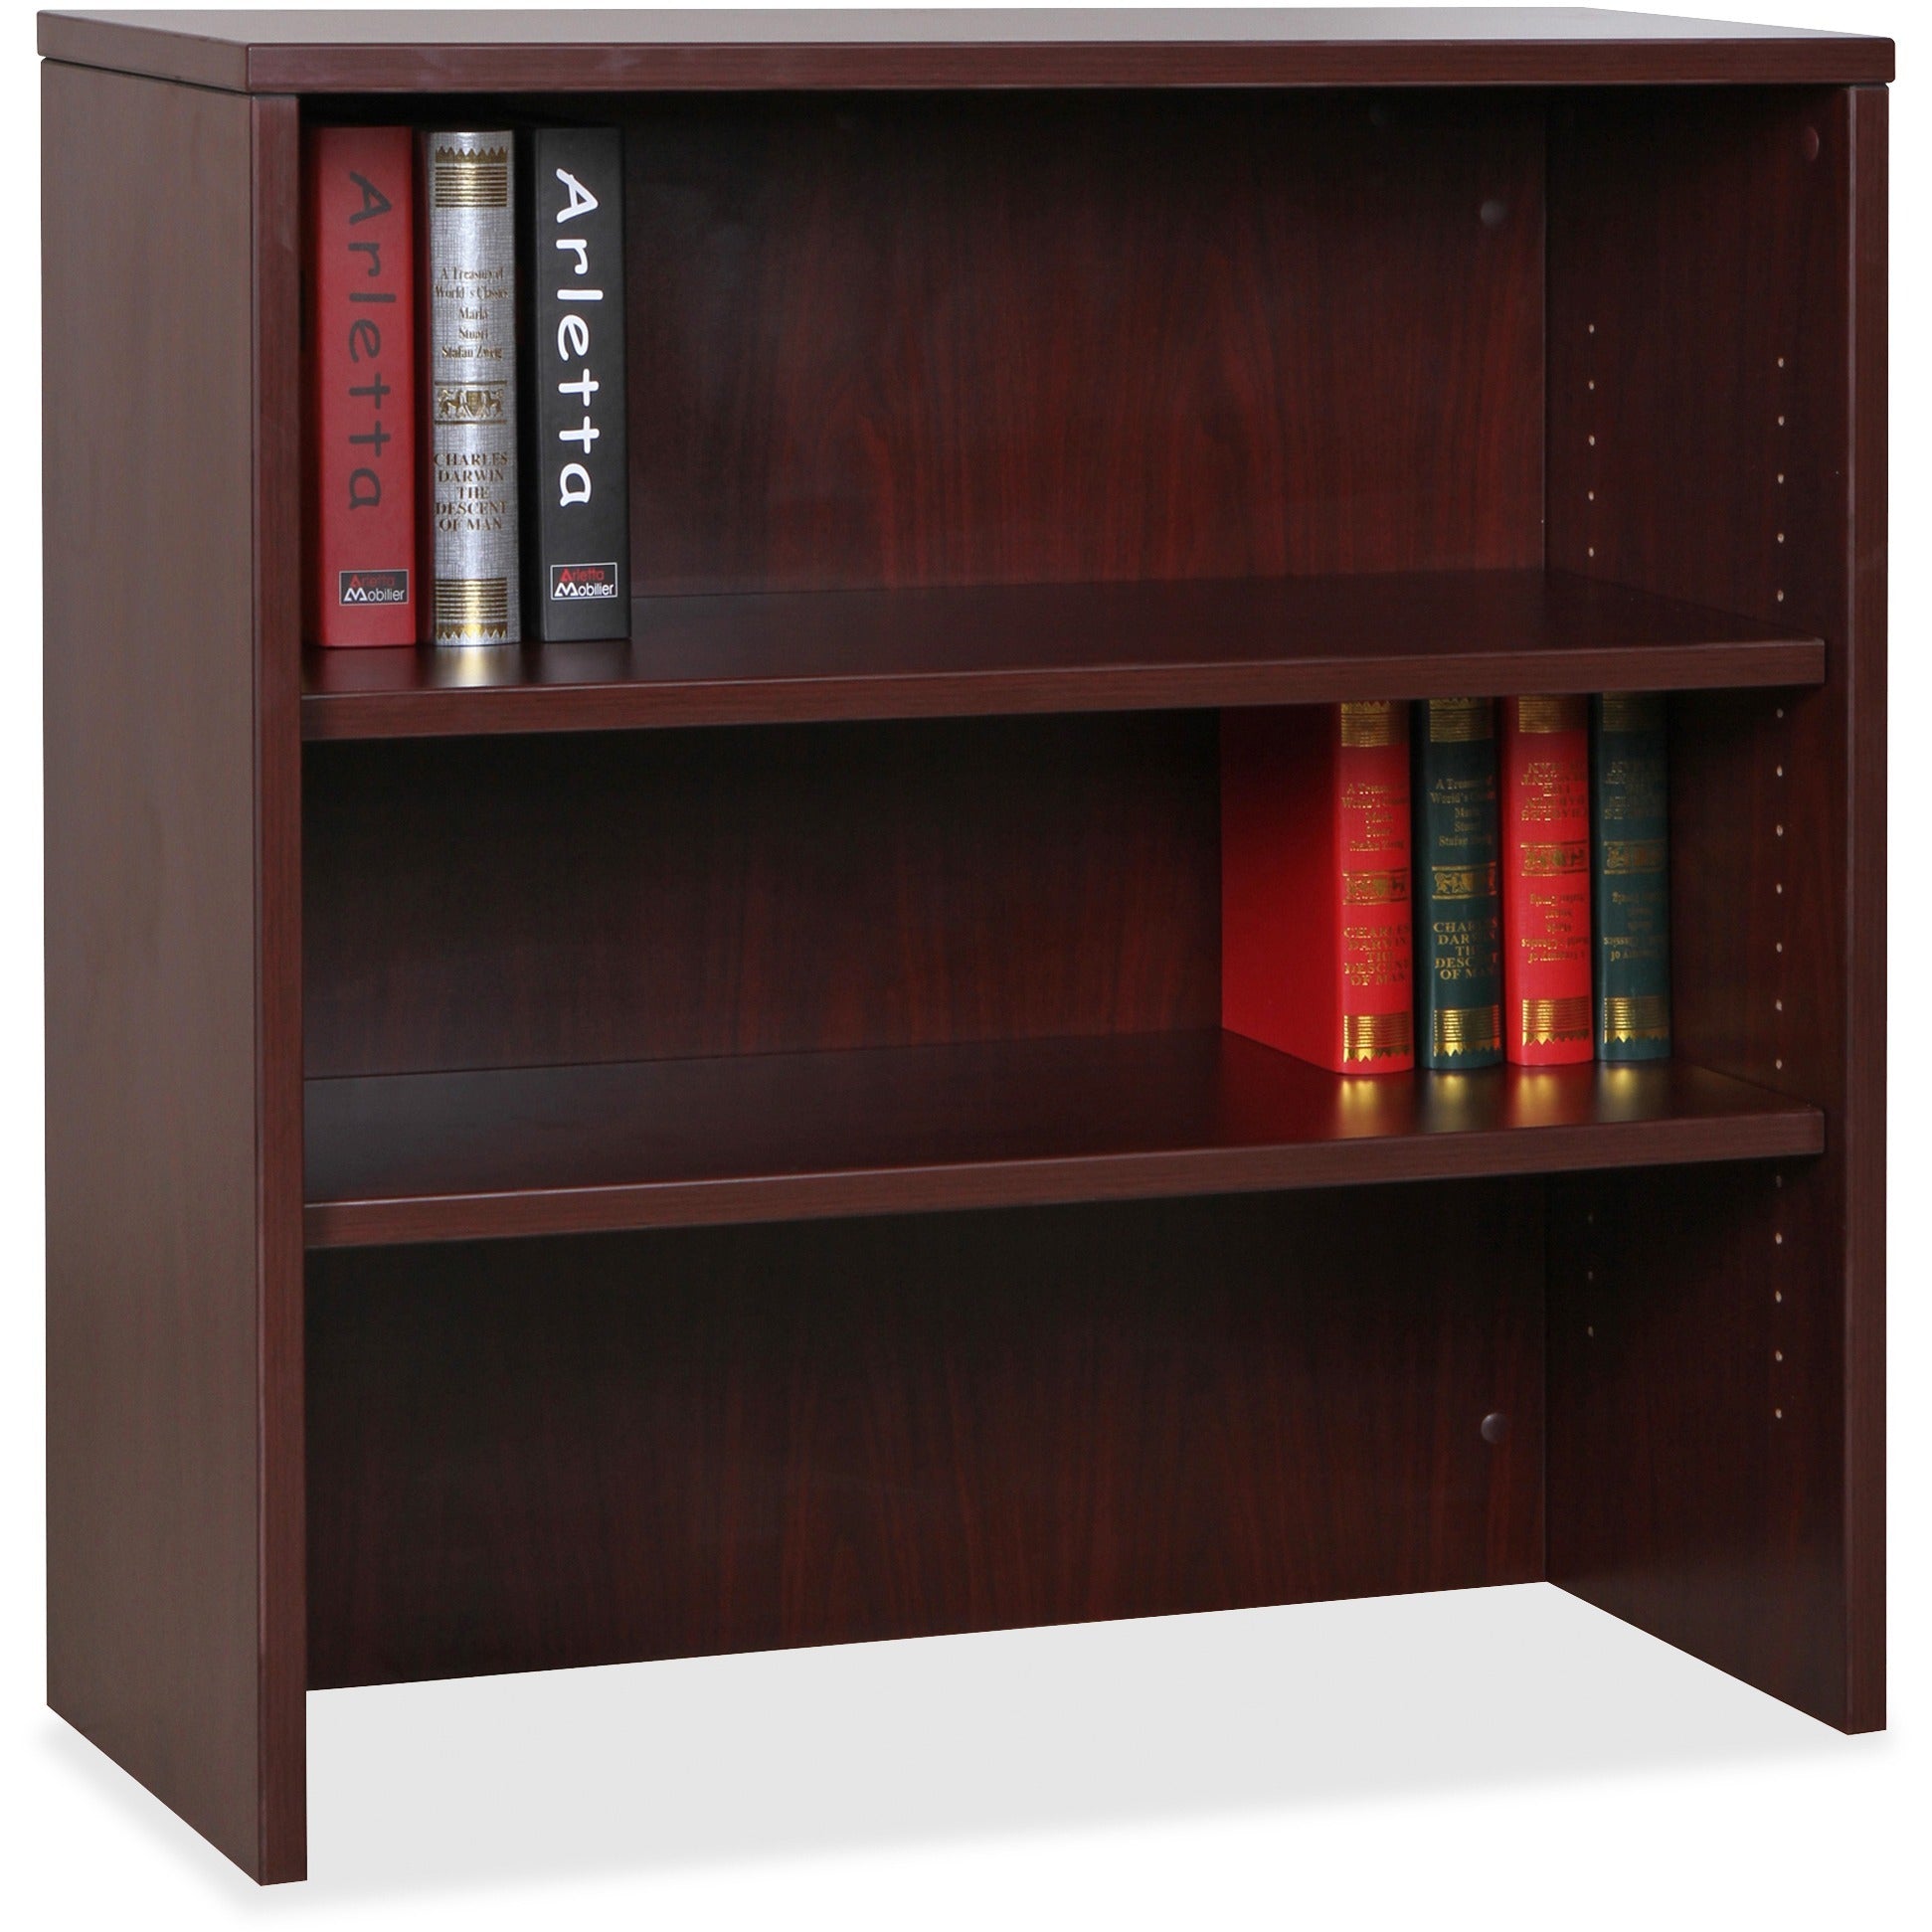 lorell-essentials-series-stack-on-bookshelf-36-x-15-x-36-2-x-shelfves-stackable-mahogany-laminate-mfc-polyvinyl-chloride-pvc-assembly-required_llr69614 - 3